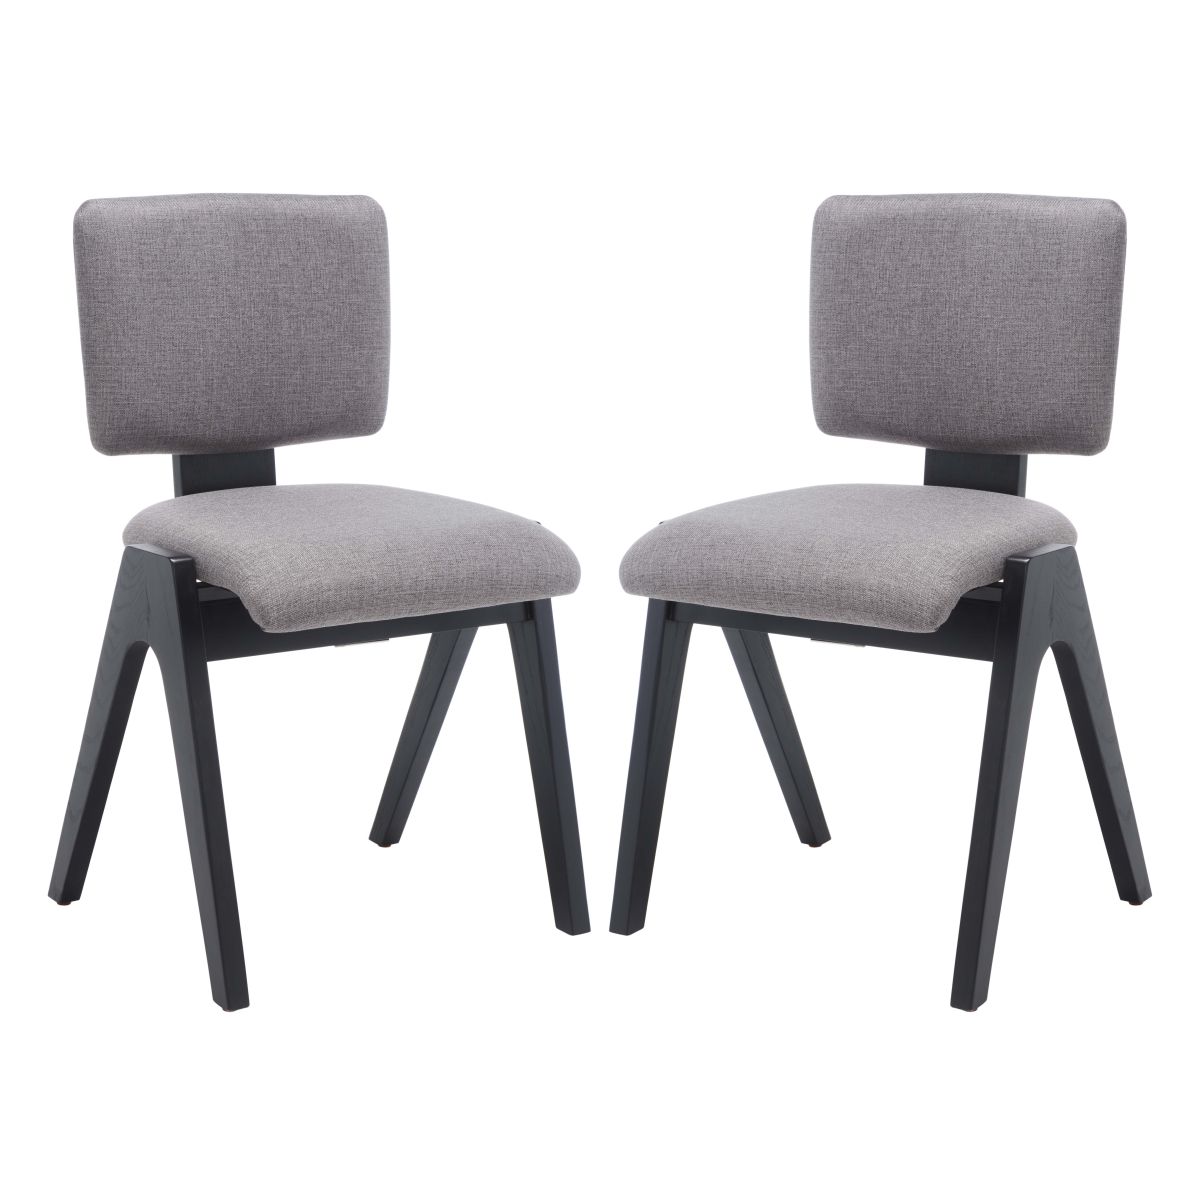 Safavieh Couture Alisyn Wood Dining Chair(Set of 2) , SFV4125 - Black / White